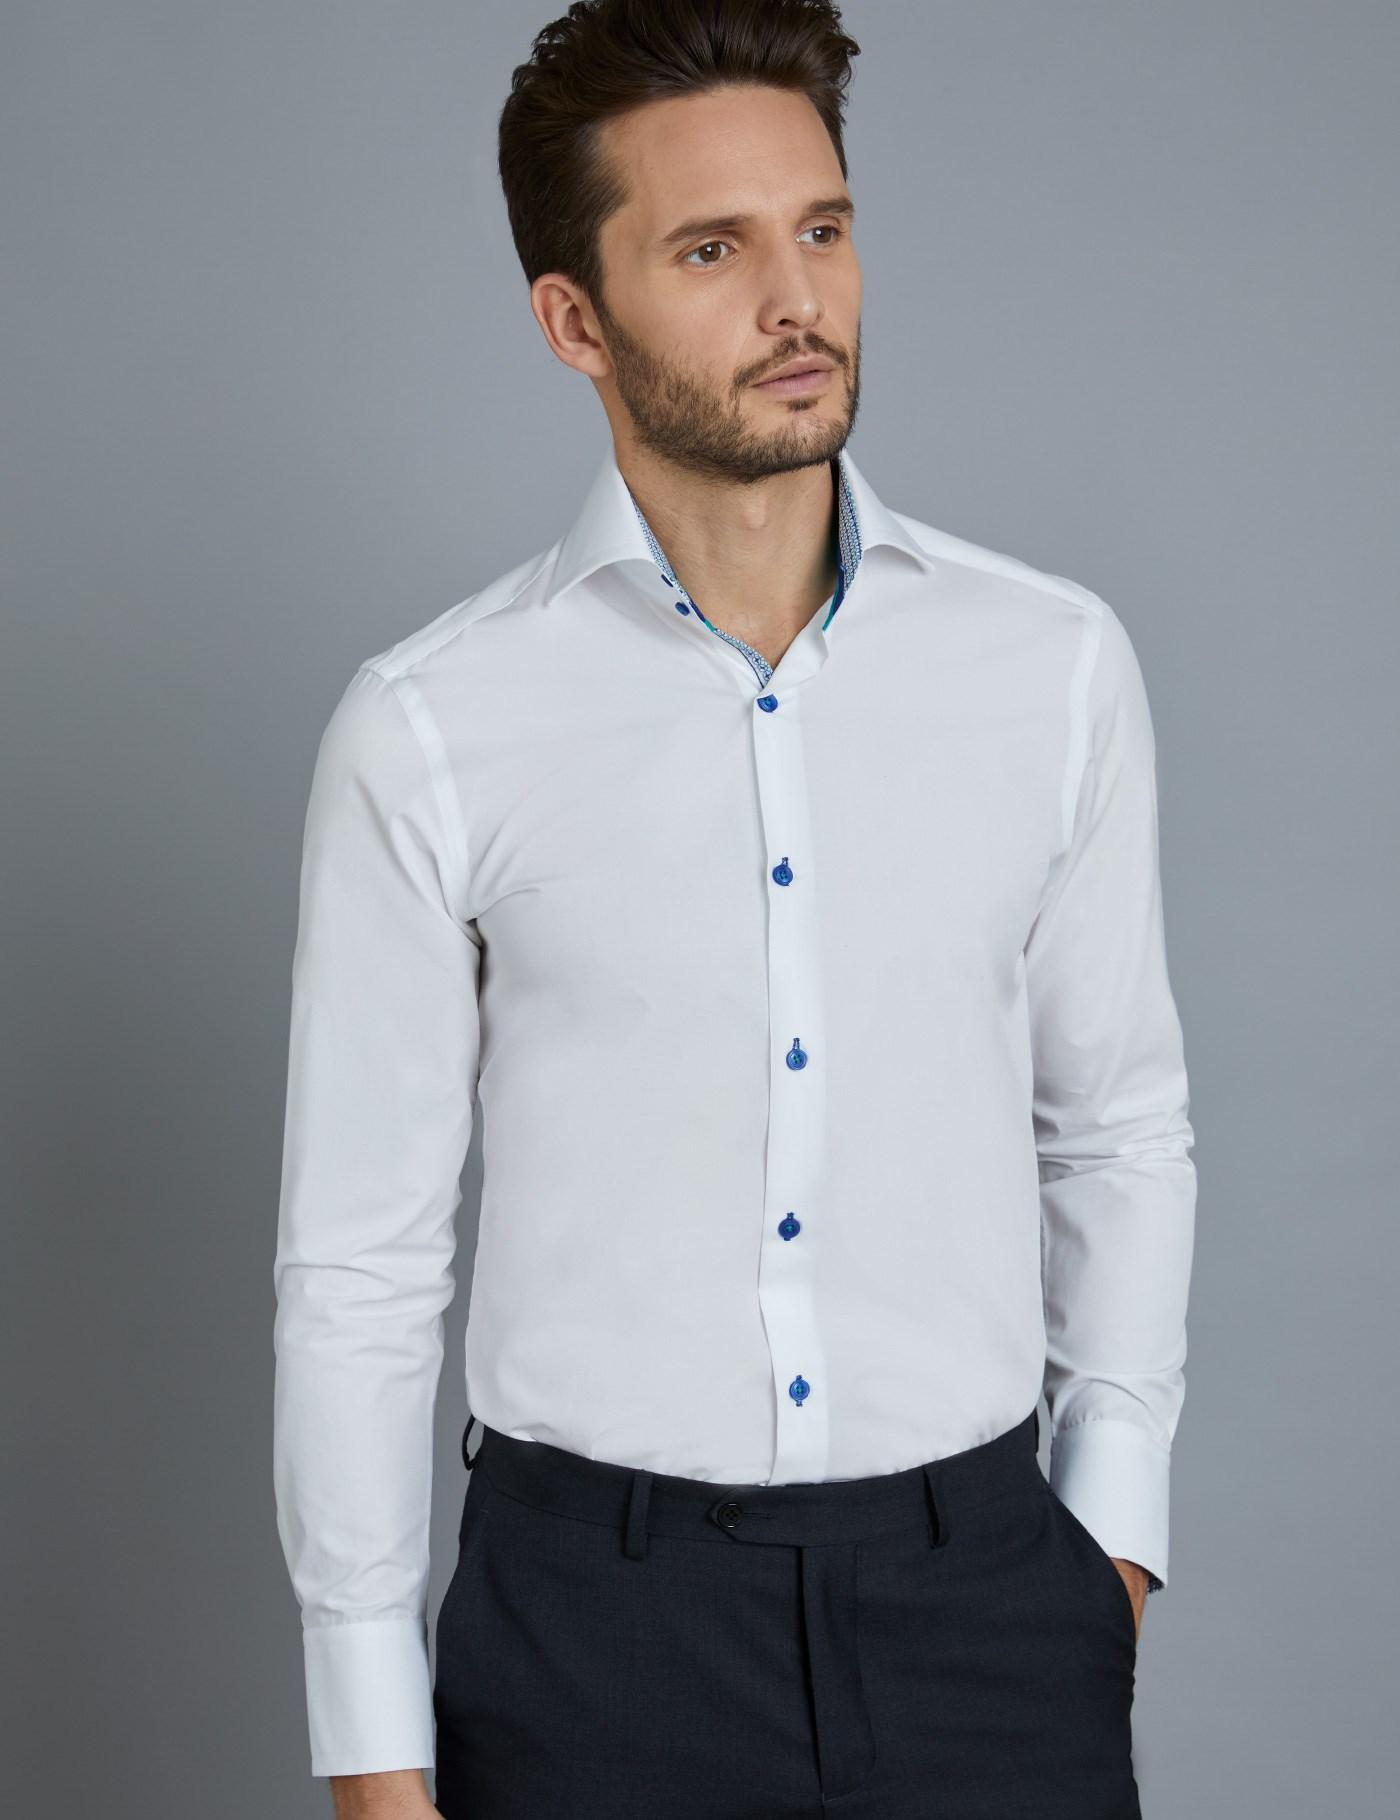 Hawes & Curtis White Slim Fit Shirt in White for Men - Lyst